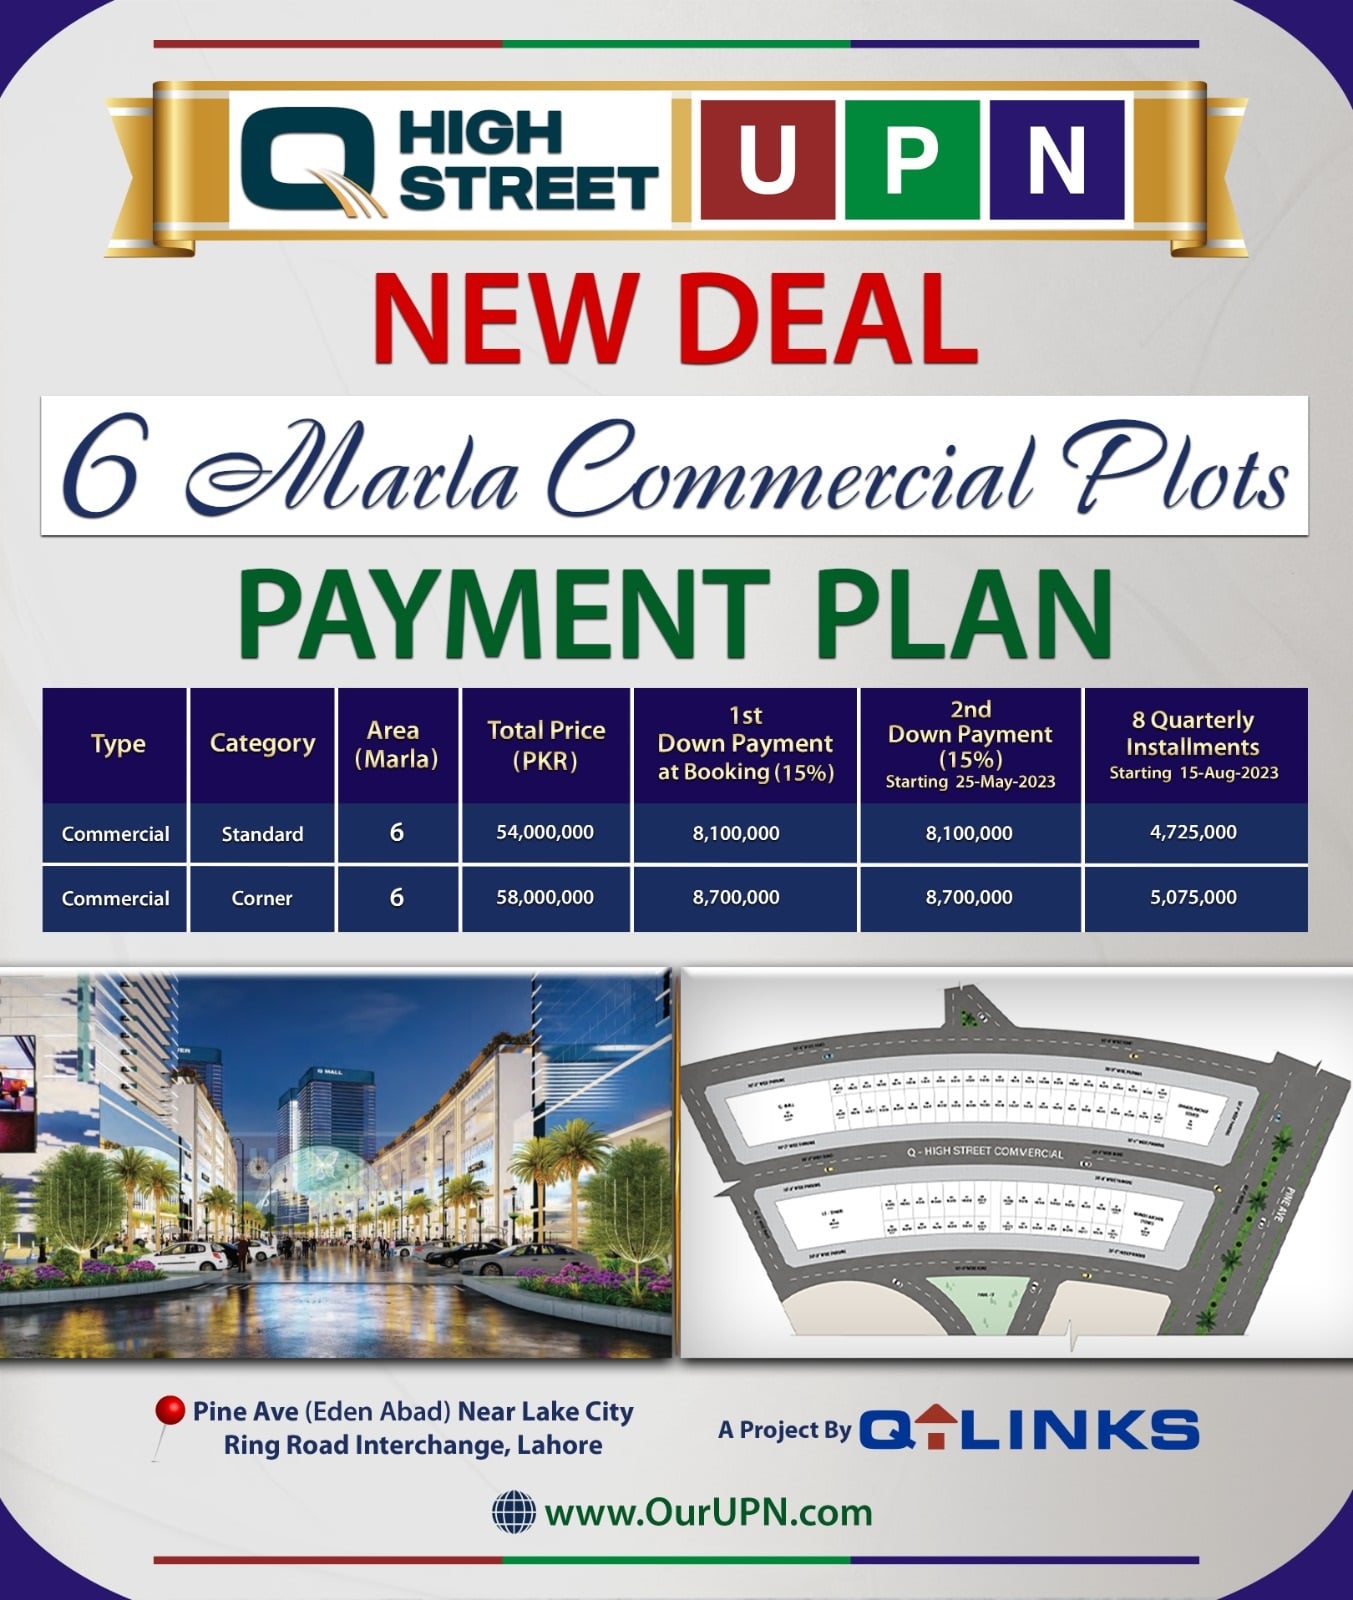 Q High Street 6 Marla Commercial Plots Payment Plan